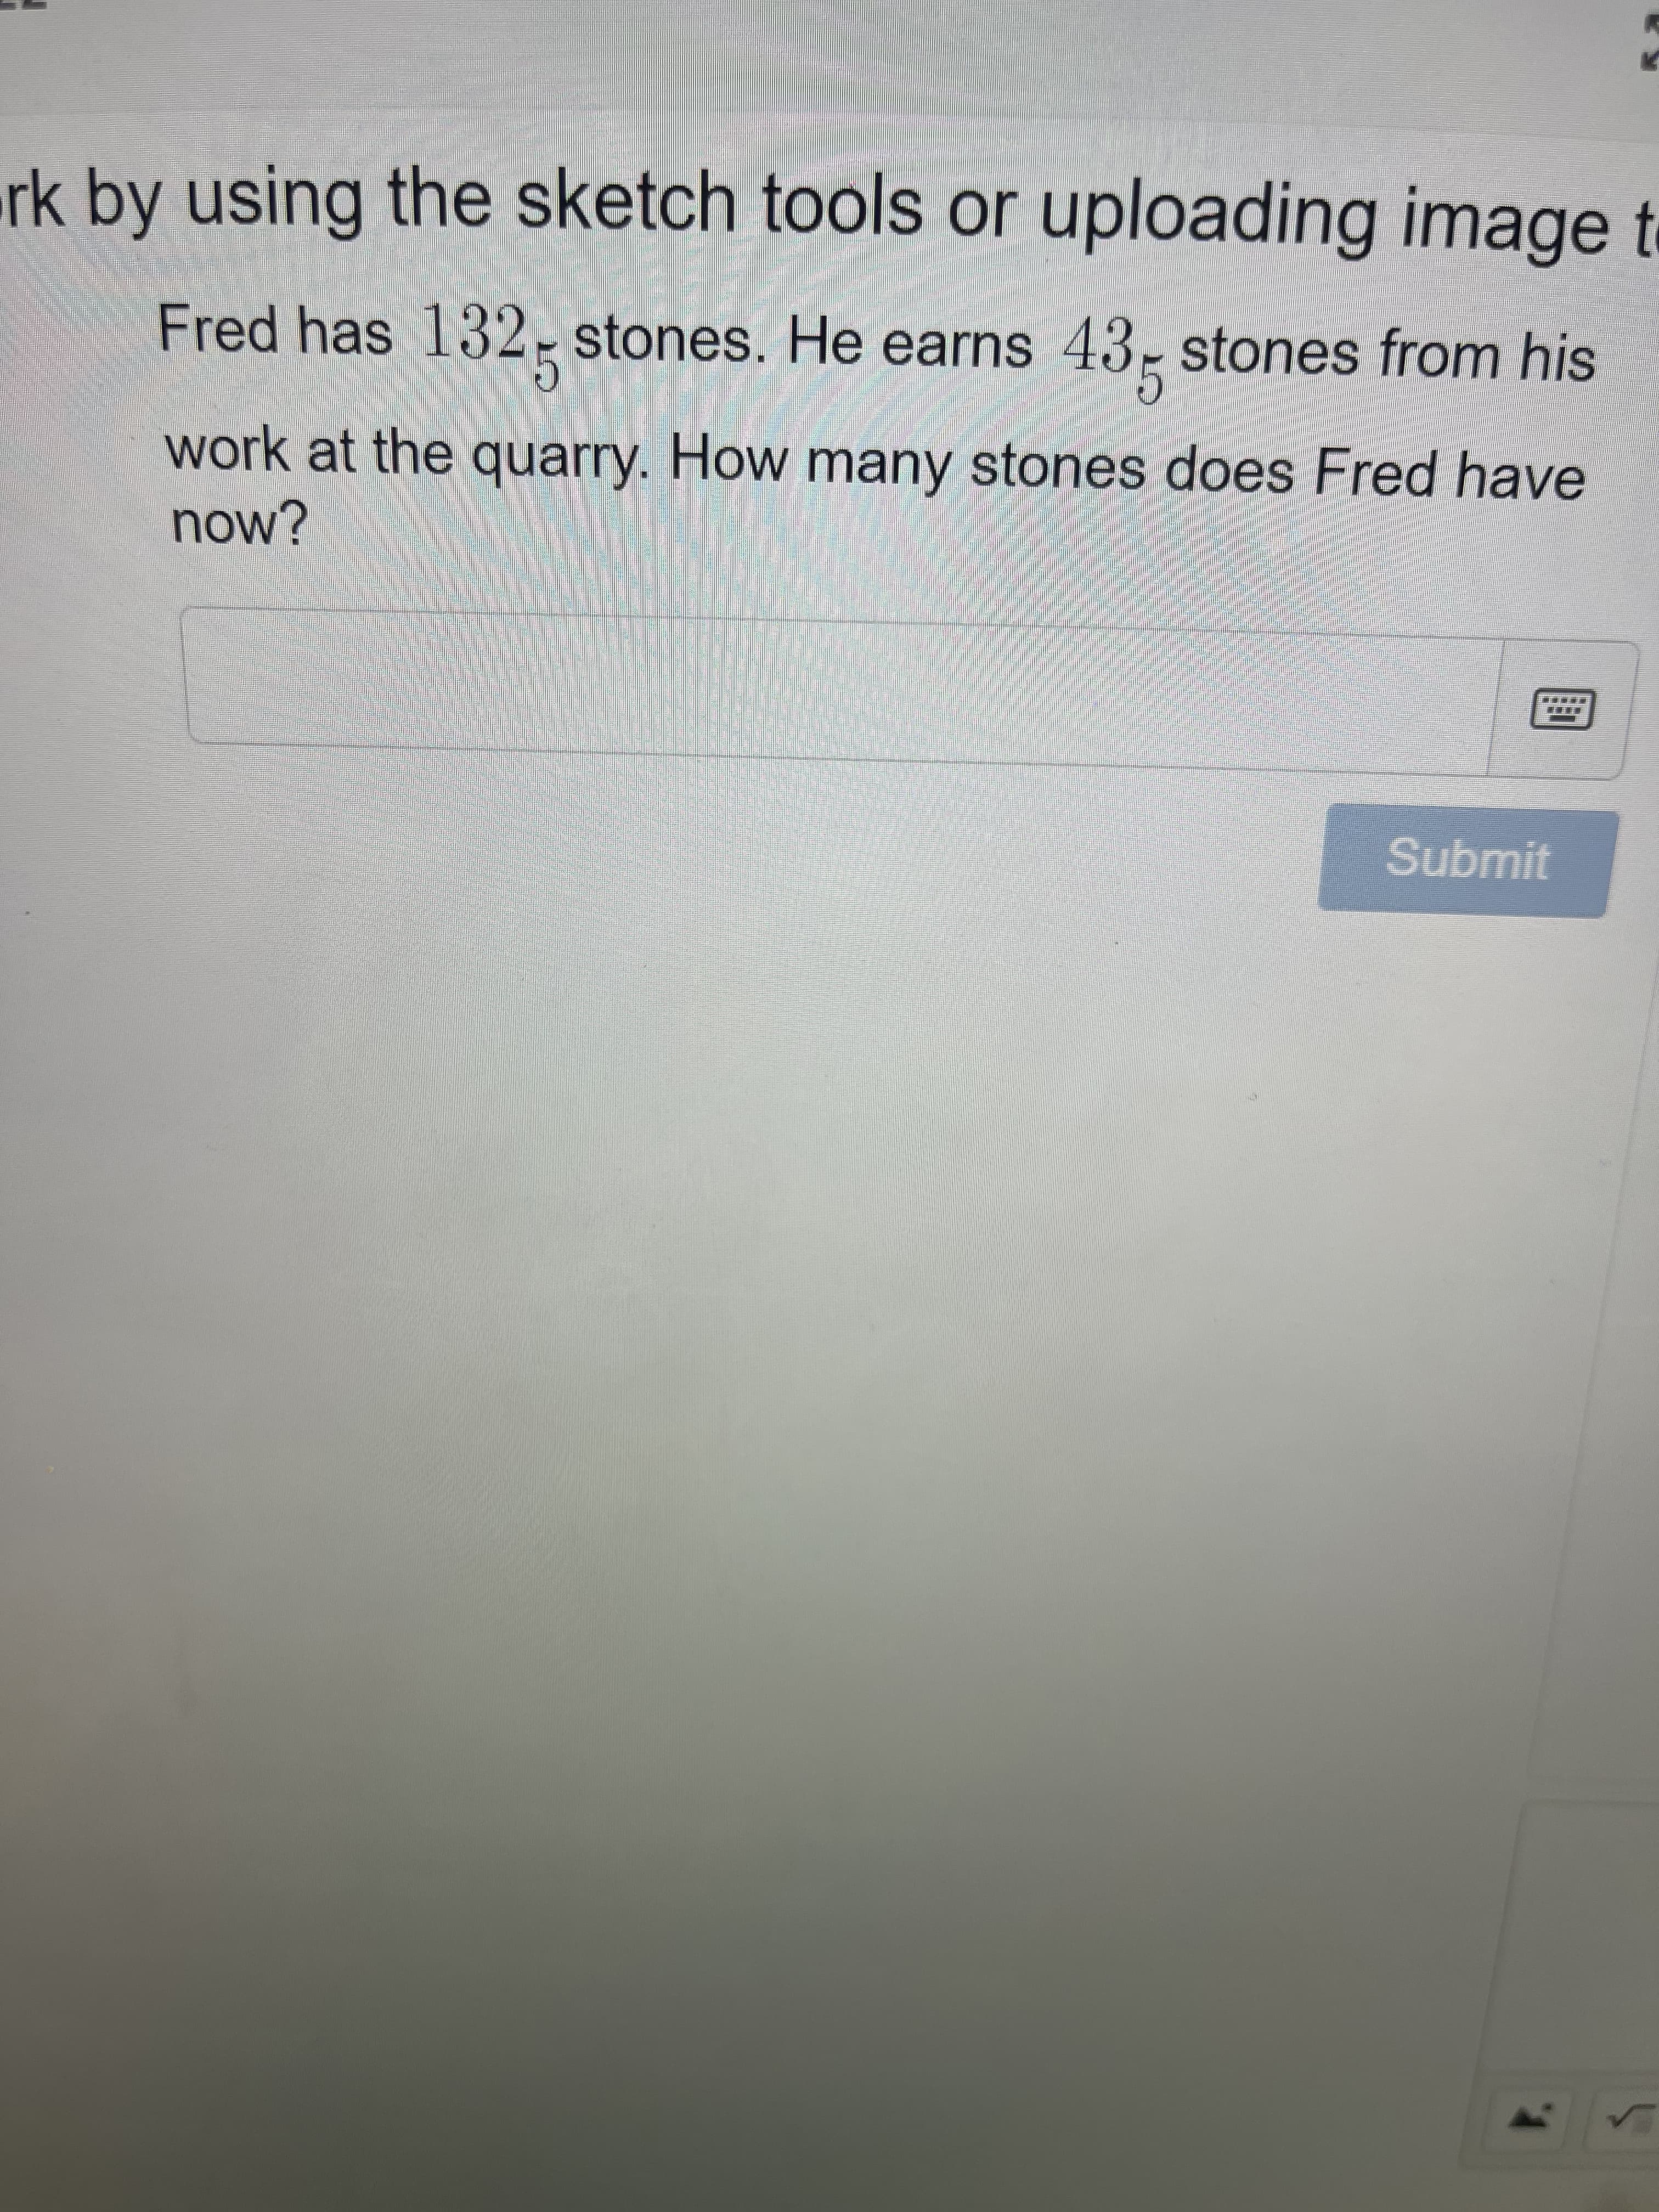 rk by using the sketch tools or uploading image t
Fred has 132-stones. He earns 43- stones from his
work at the quarry. How many stones does Fred have
now?
Submit
1